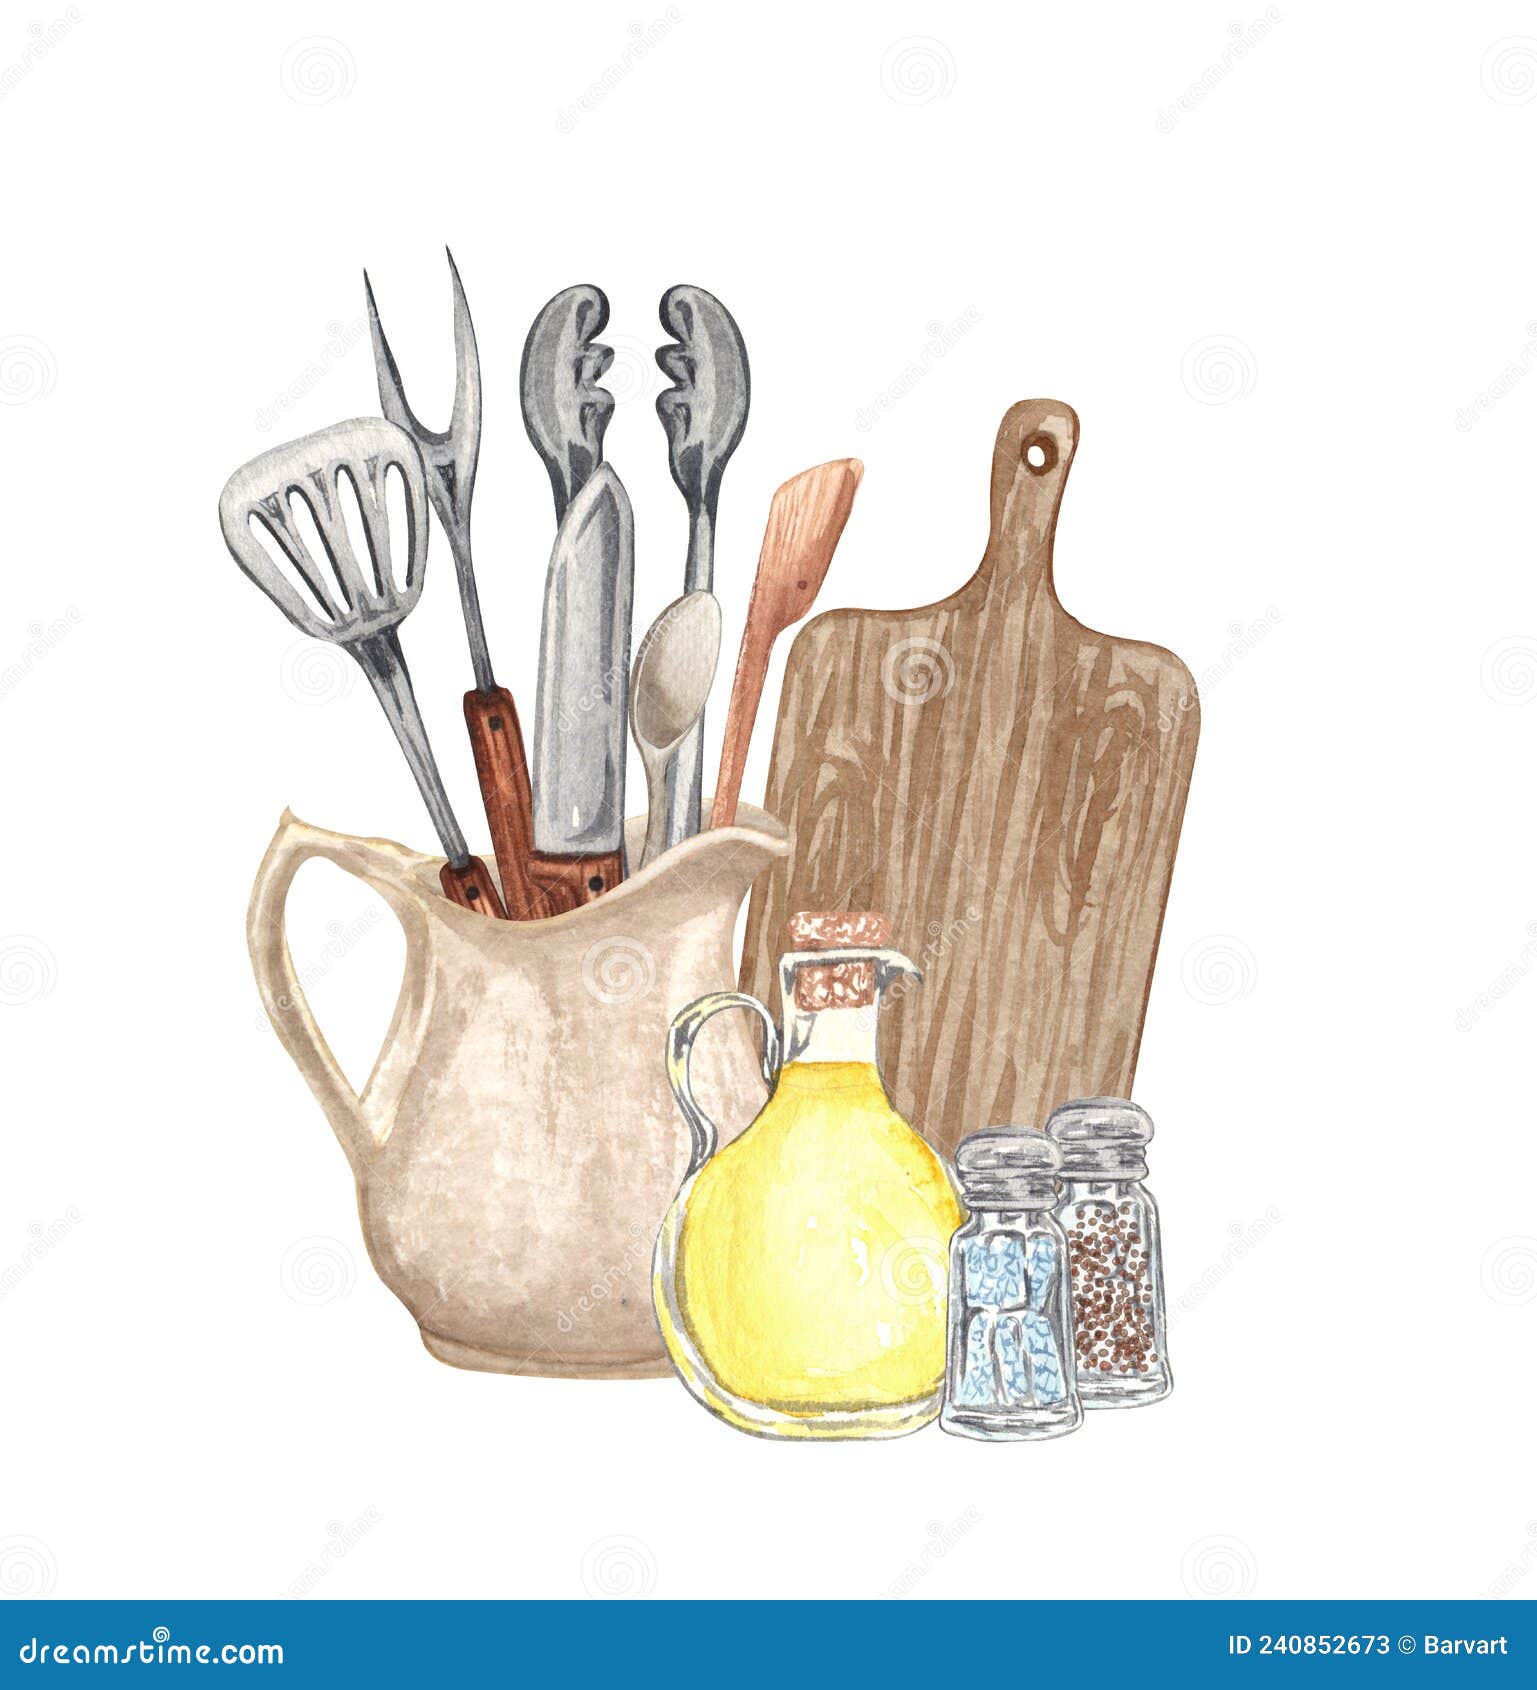 Set of baking tools and kitchen utensils. Hand drawn watercolor